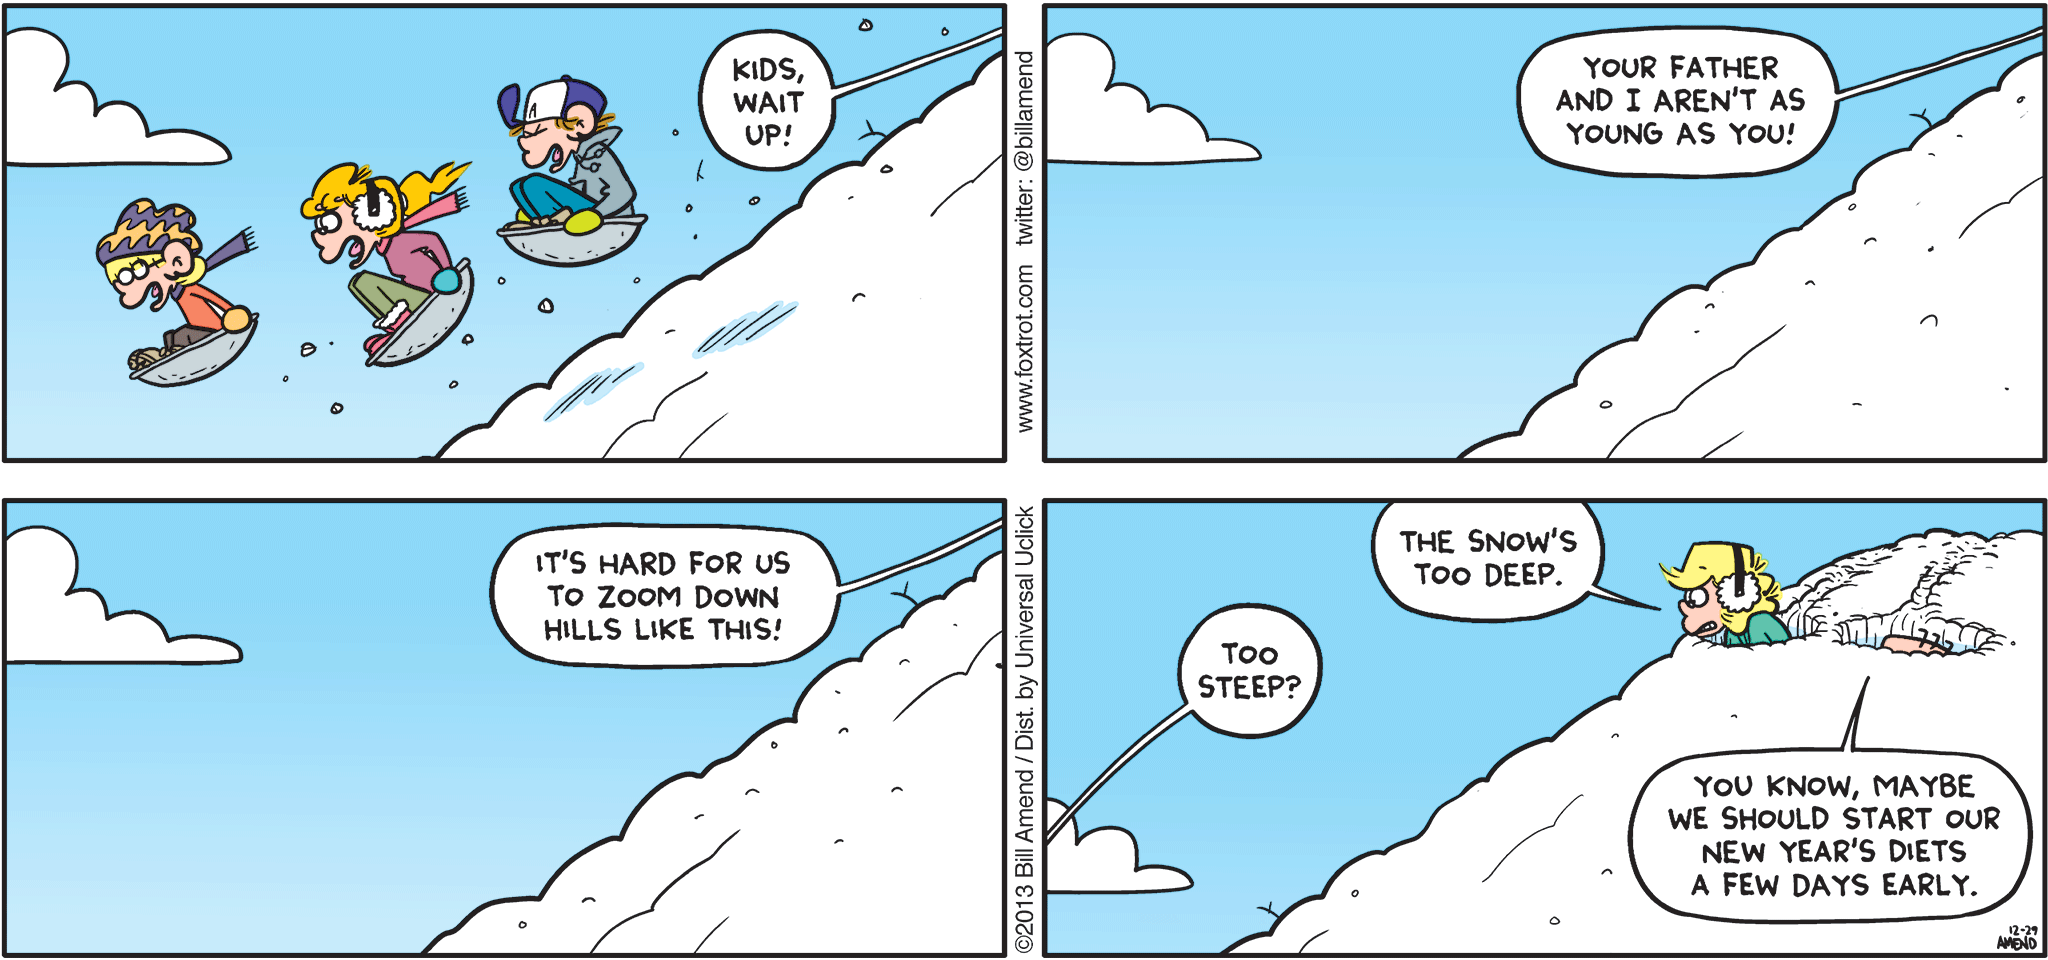 FoxTrot by Bill Amend - "Weight Up!" published December 29, 2013 - Andy: Kids, wait up! Your father and I aren't as young as you! It's hard for us to zoom down hills like this! Jason: Too steep? Andy: The snow's too deep. Roger: You know, maybe we should start our New Year's diets a few days early.